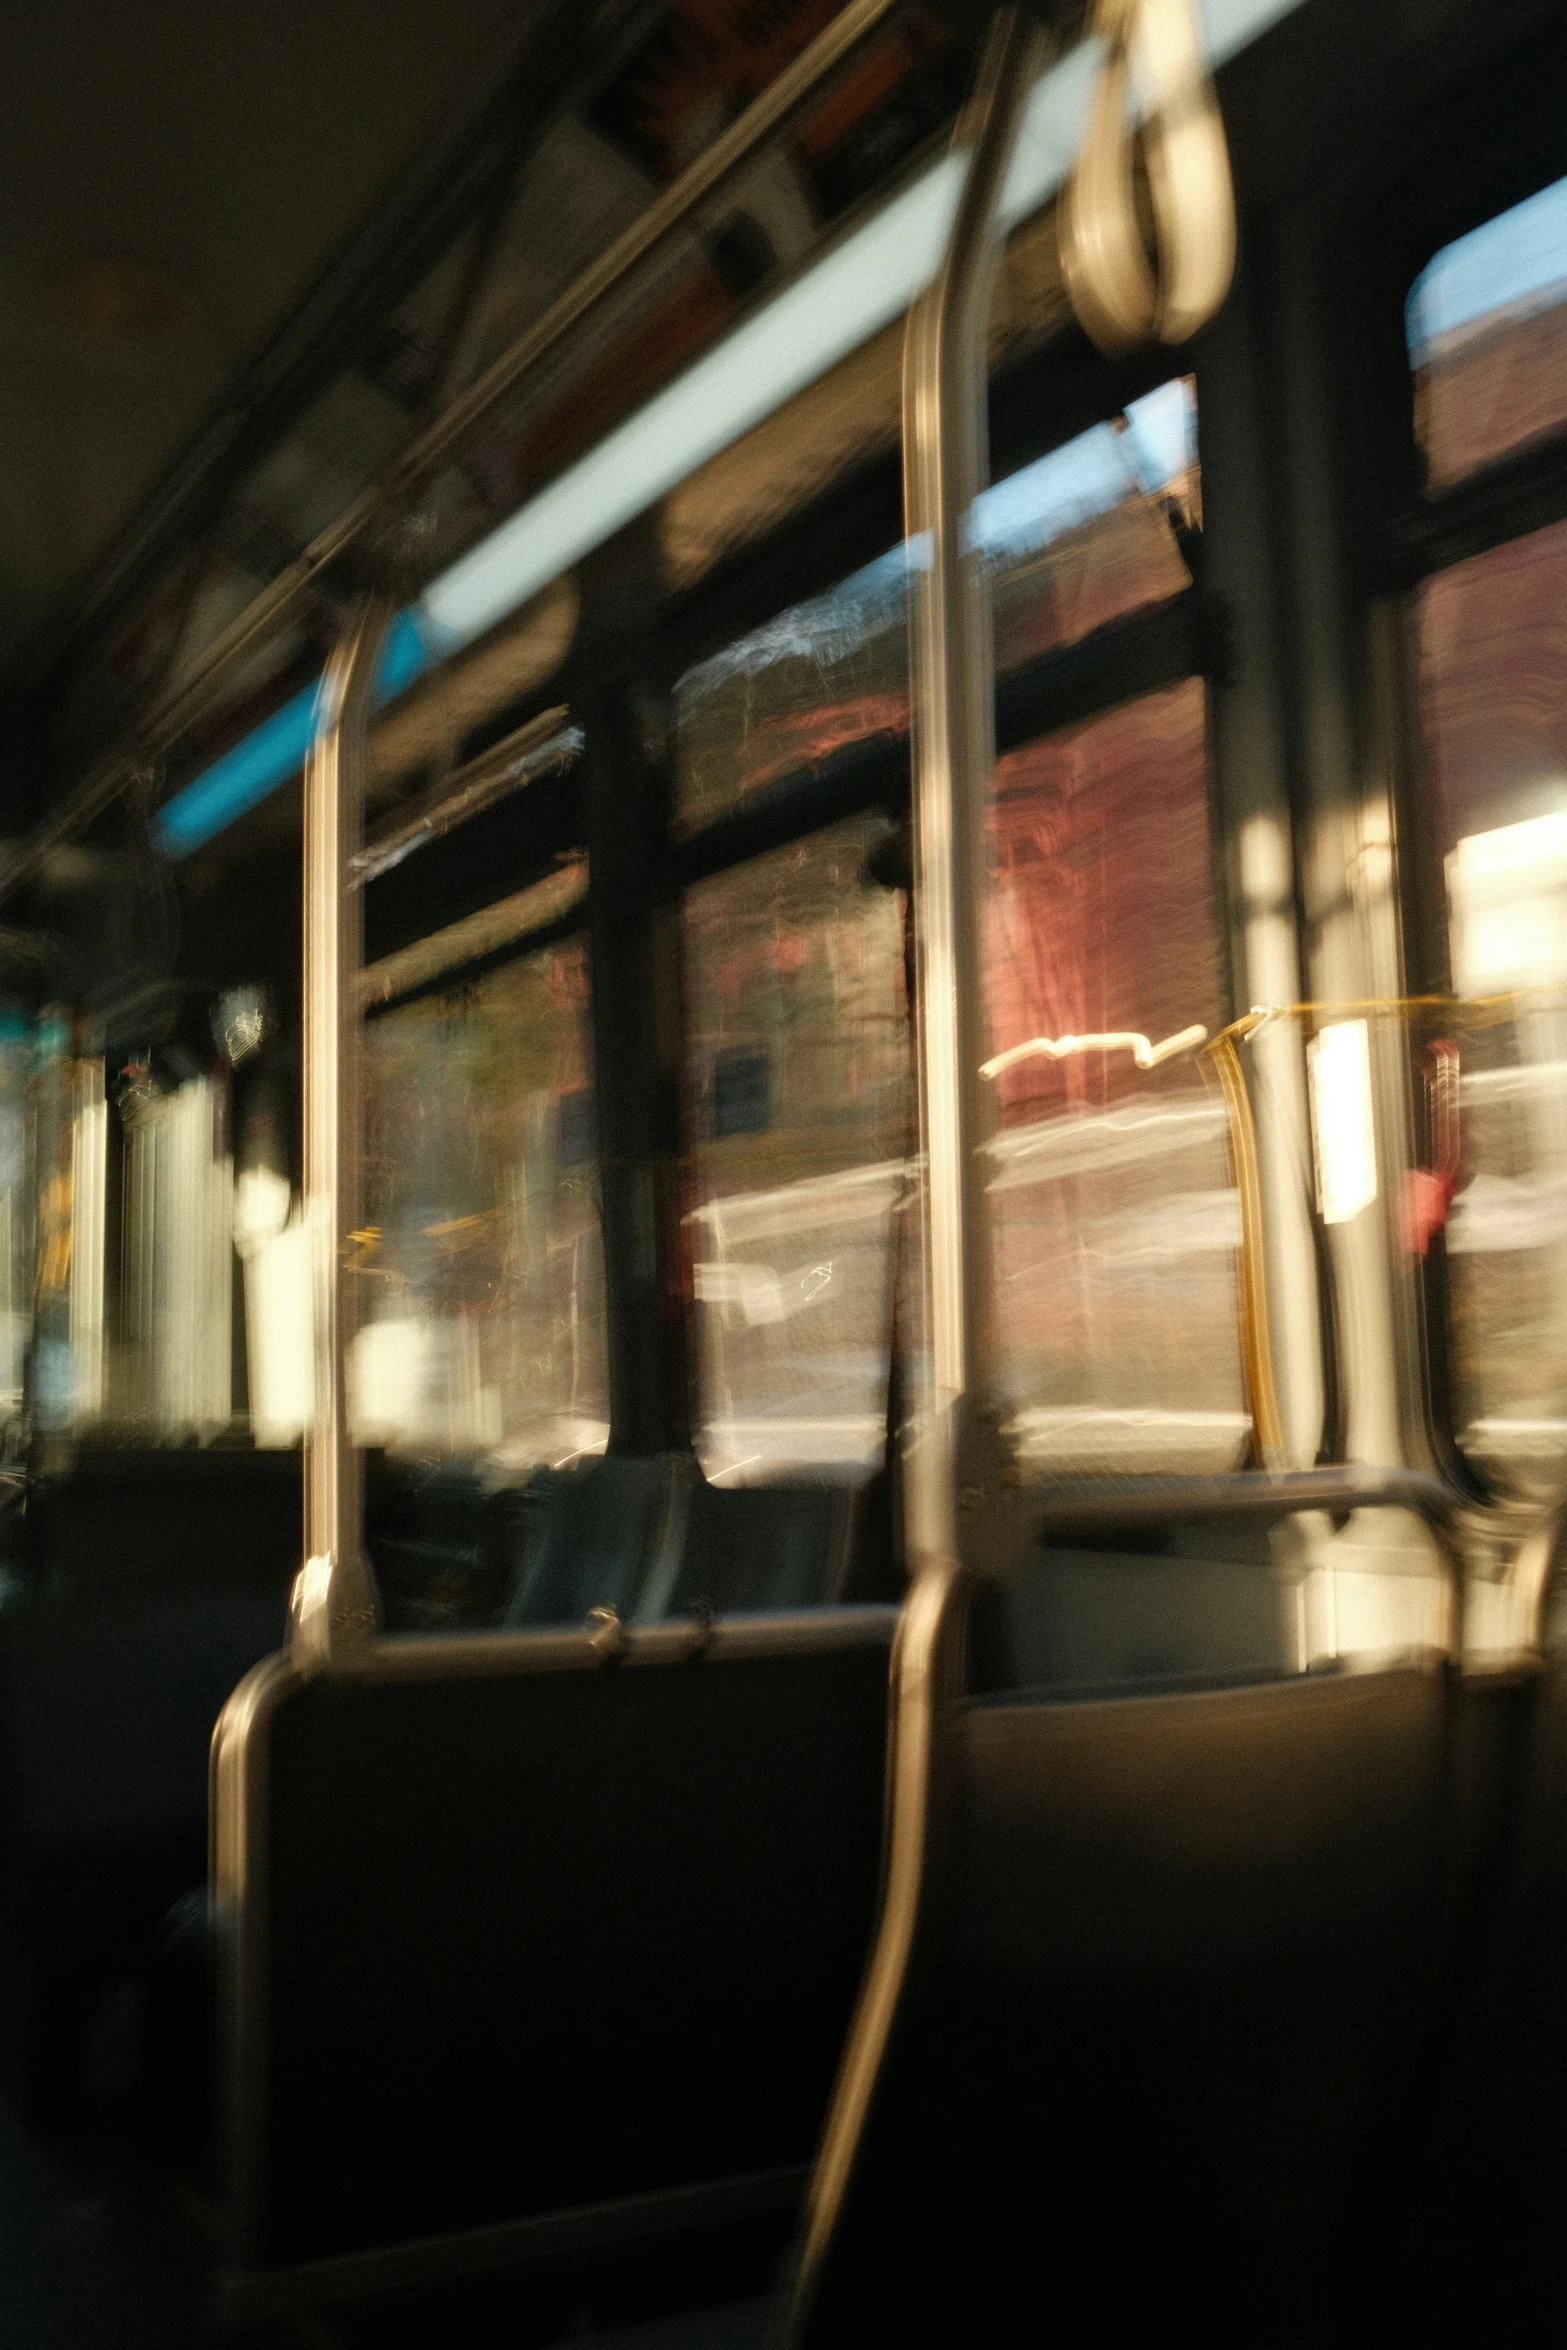 a blurry po of seats in a bus